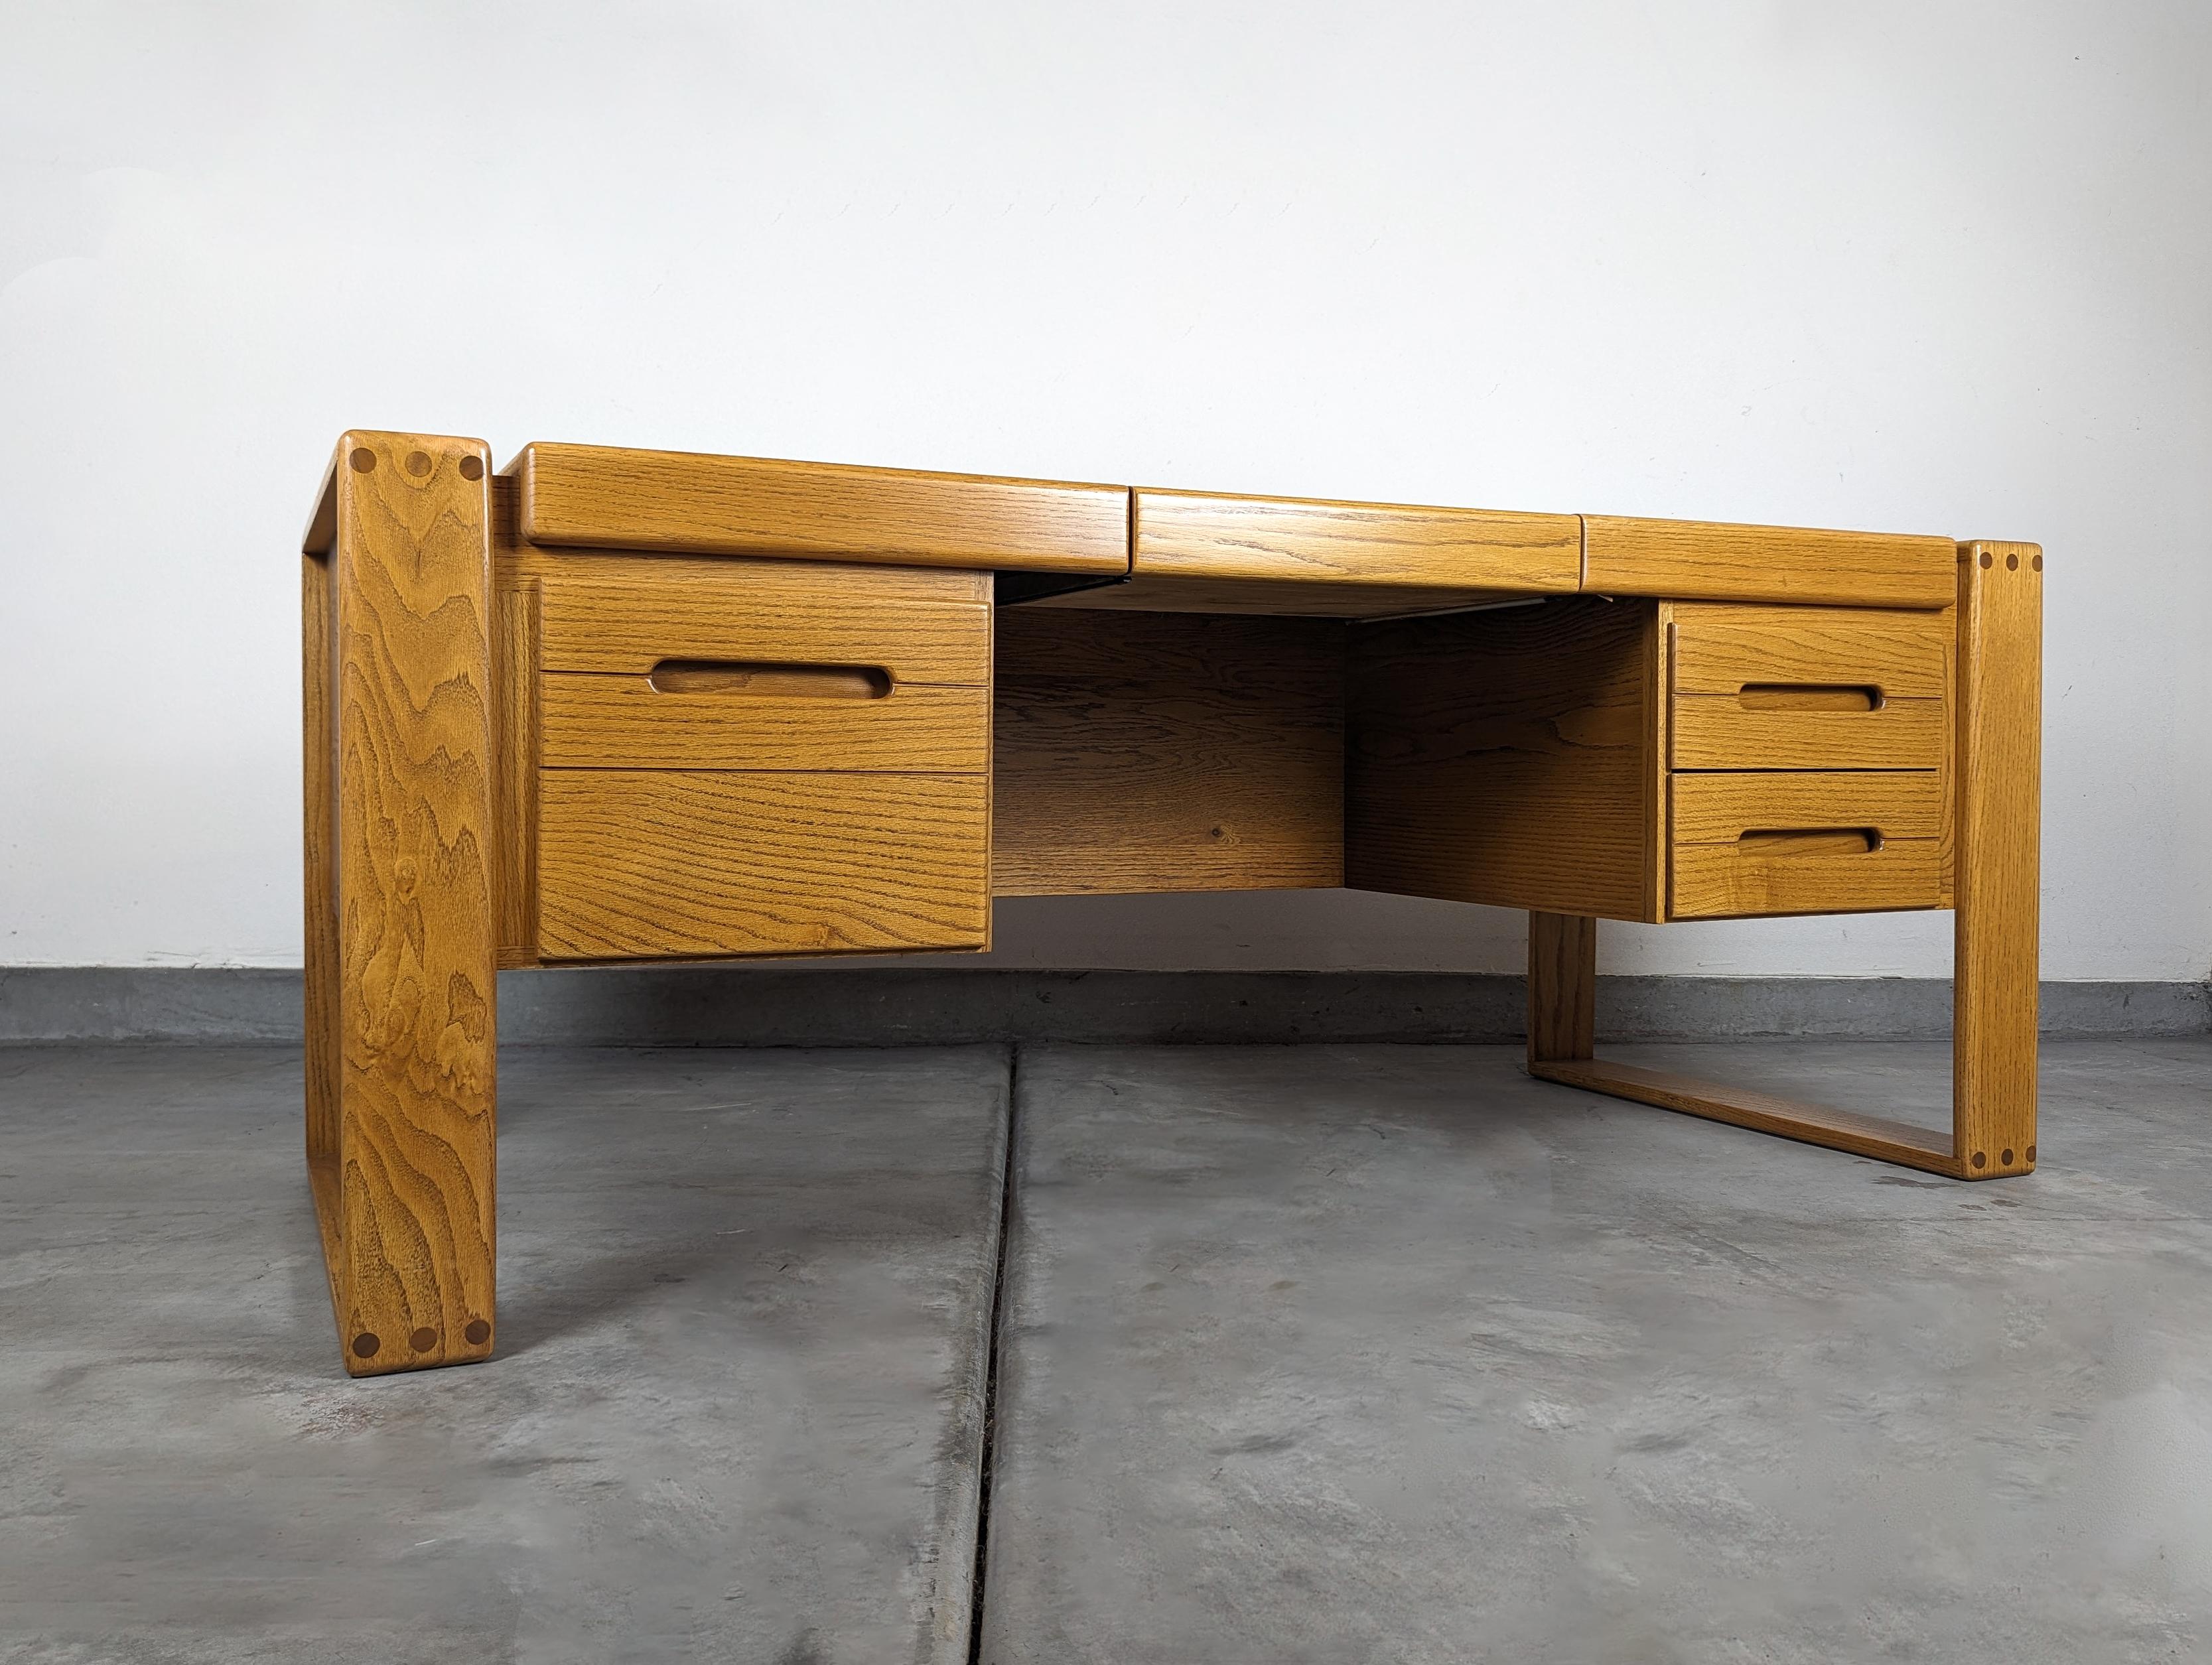 Late 20th Century Refinished Lou Hodges Handcrafted Oak Desk for California Design Group, c1980s For Sale